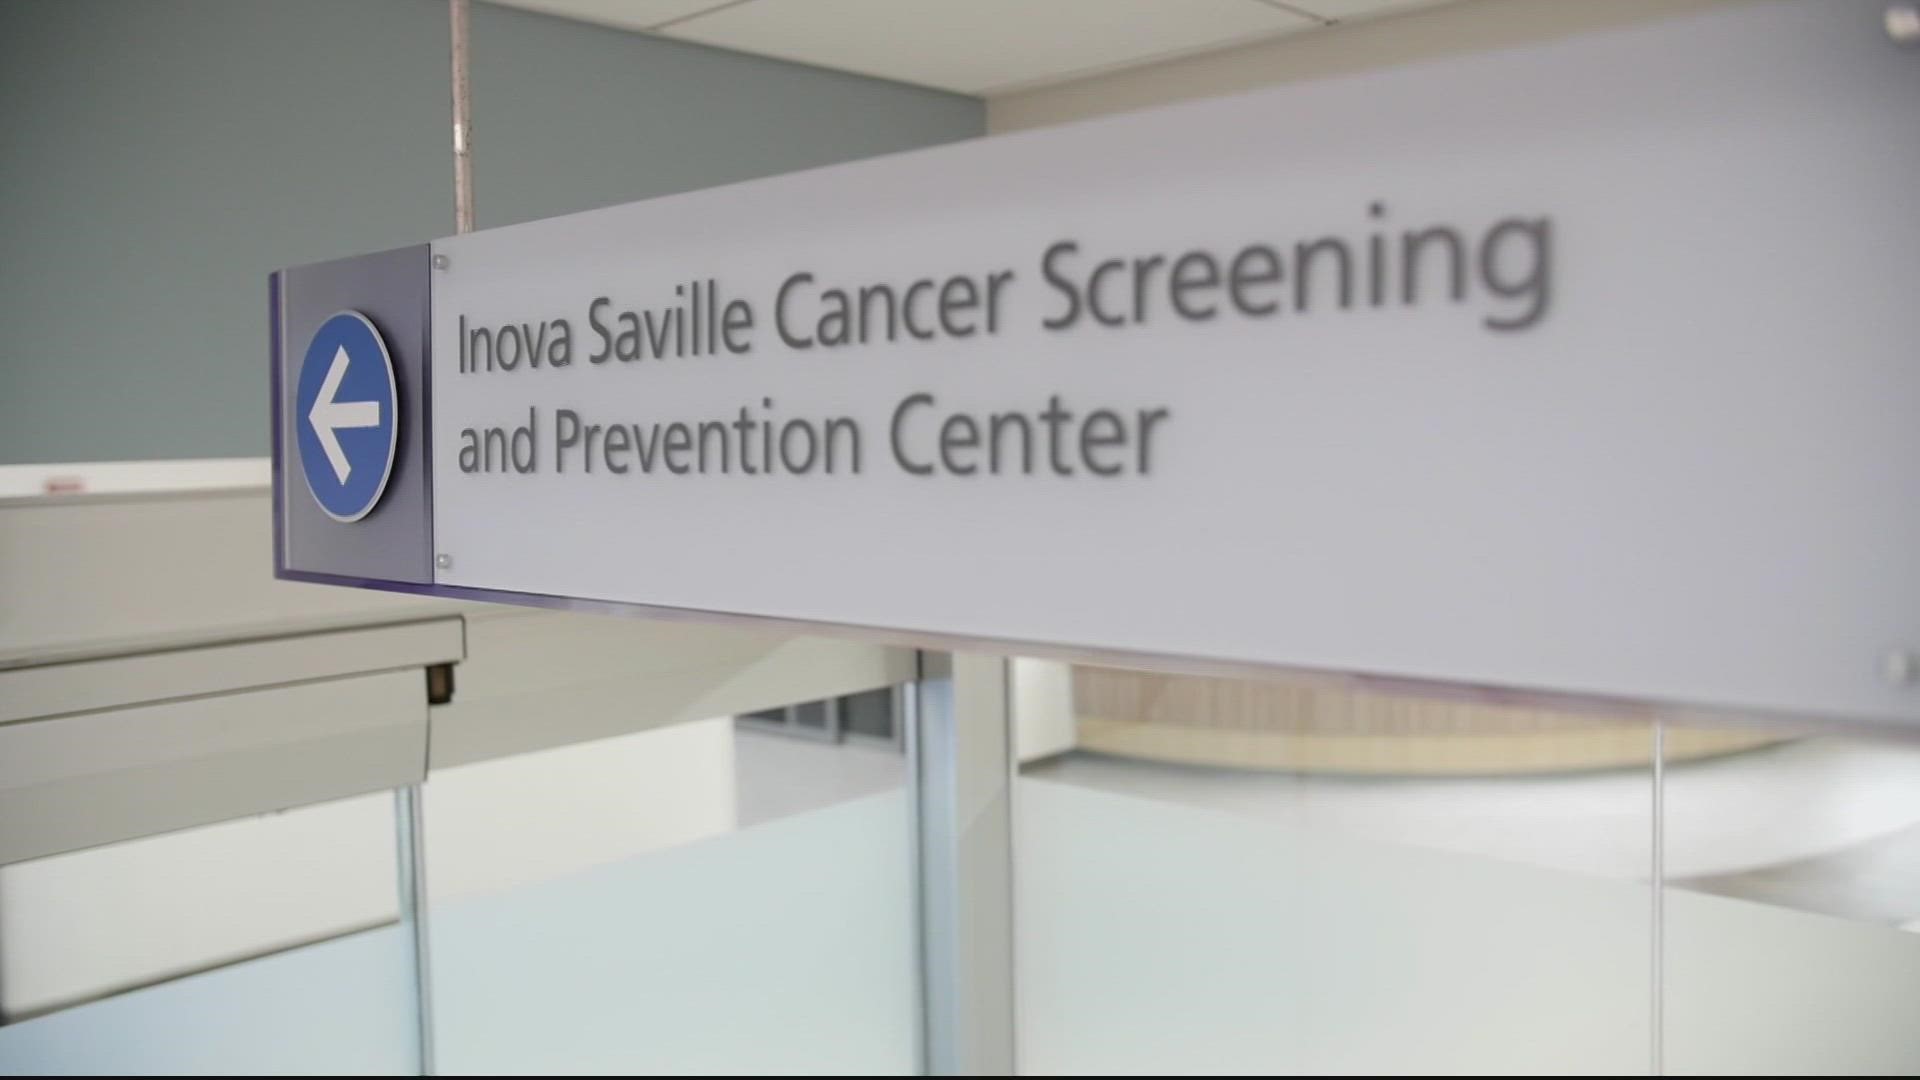 Here's a look inside the new Inova Saville Cancer Screening and Prevention Center